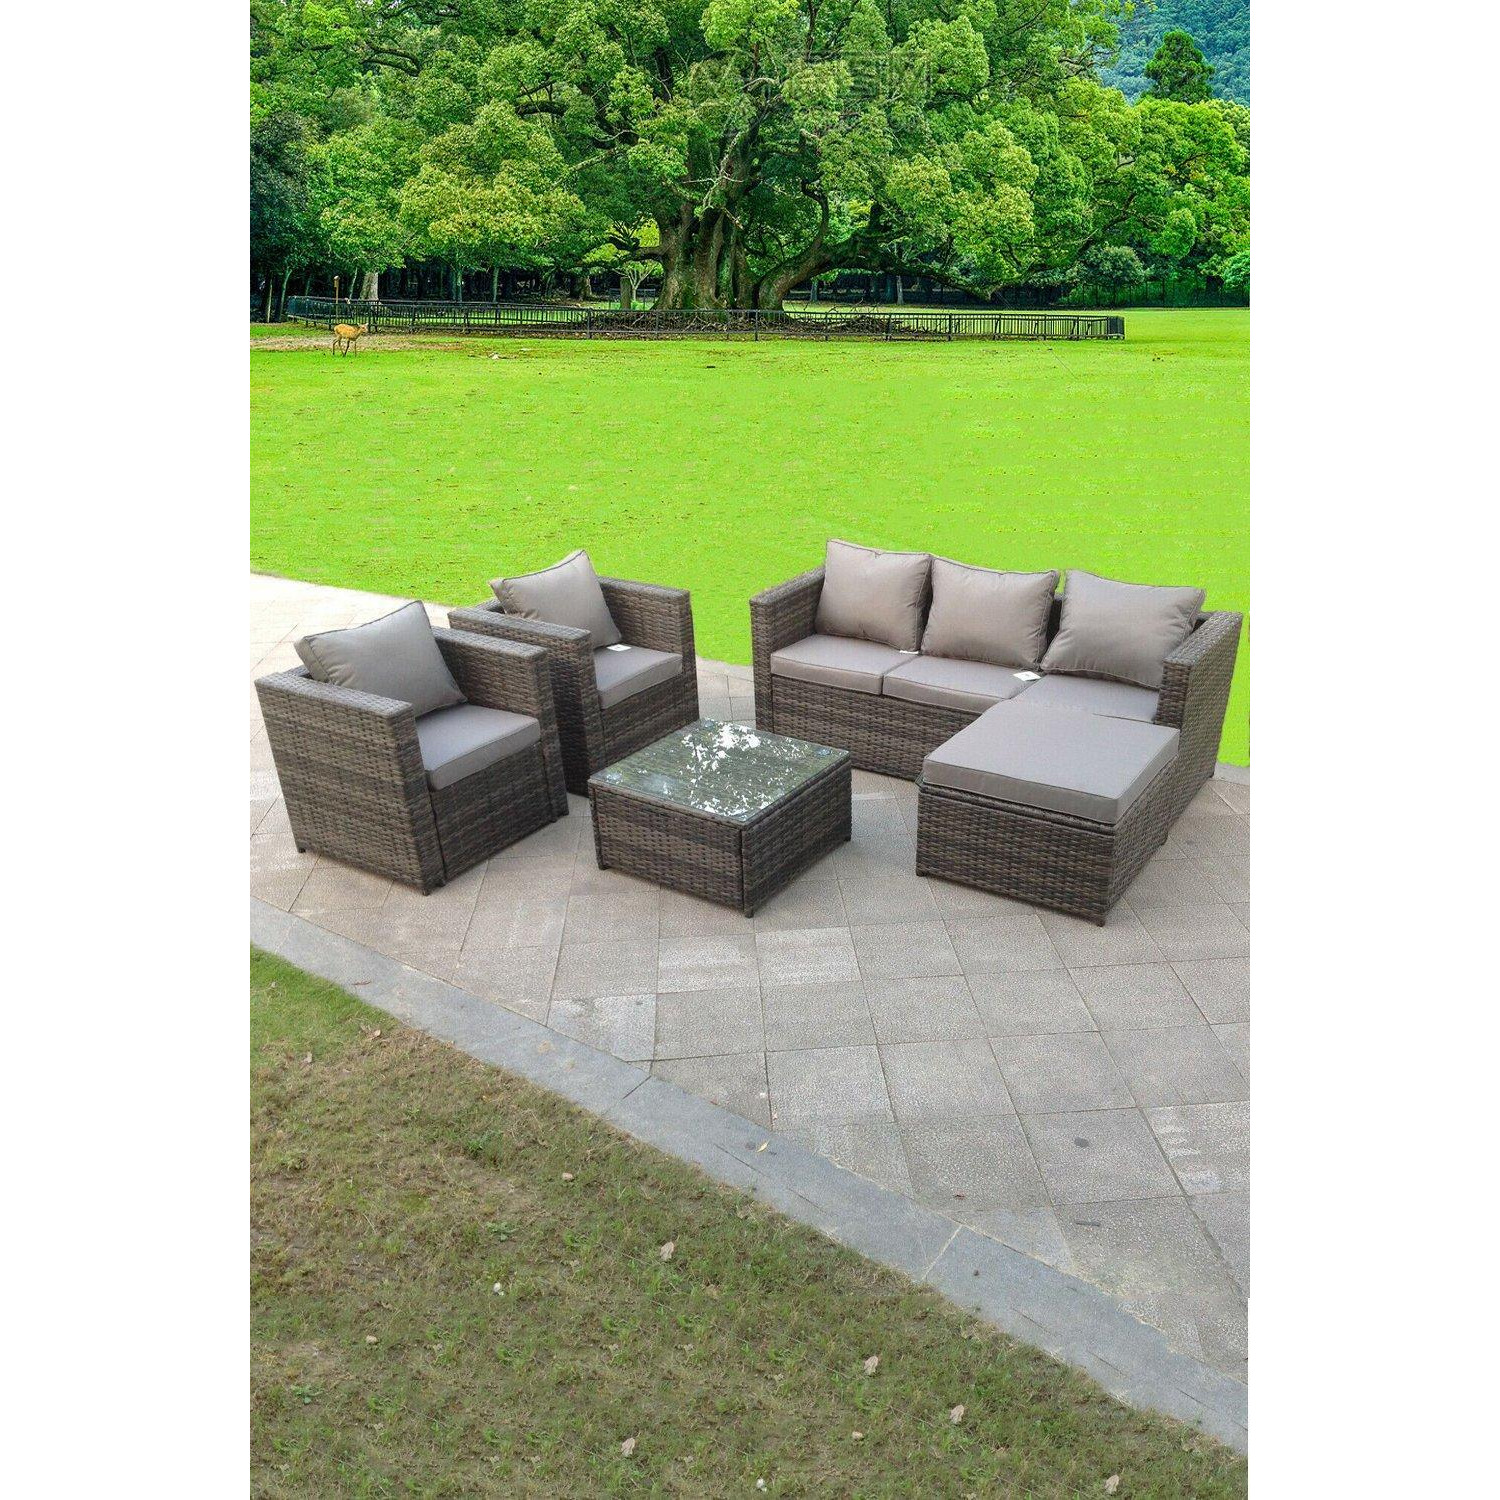 Lounge Rattan Sofa Set With Tables 2 Armchair Stool Outdoor Furniture 6 Seater - image 1